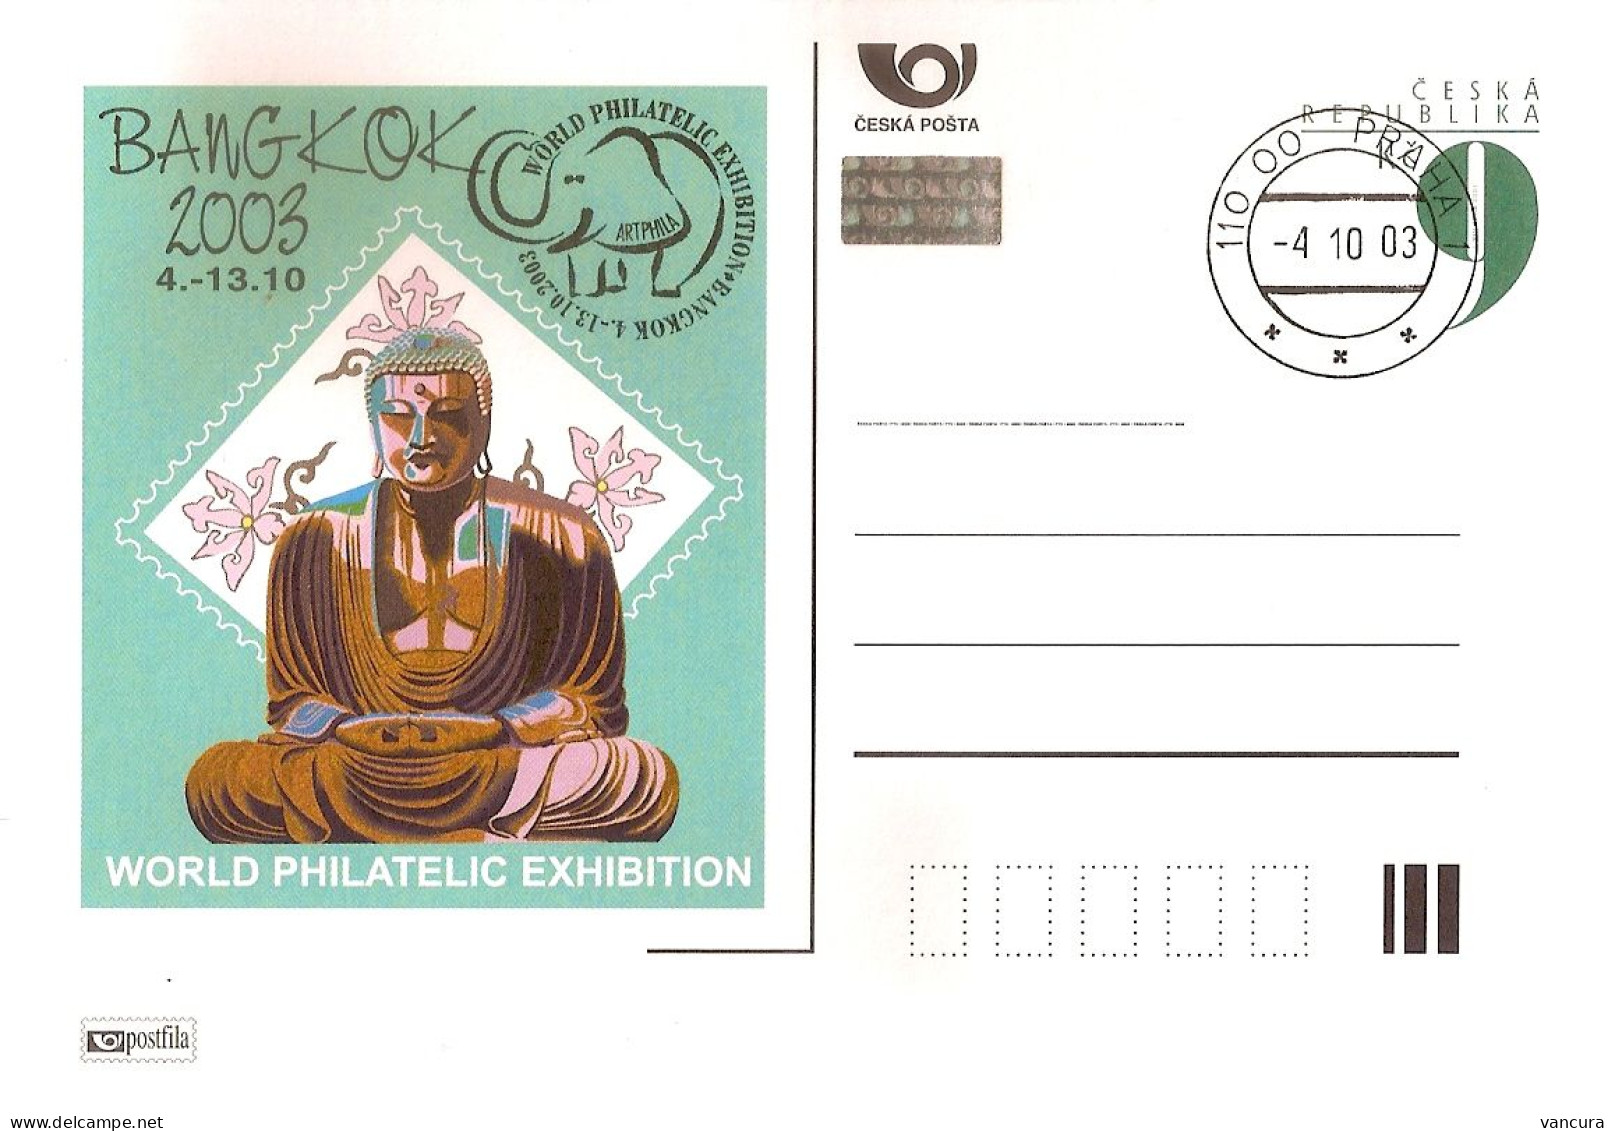 CDV A 92 Czech Republic Bangkog Stamp Exhibition Buddha 2003 The Scan Is Poor, But The Card Is OK! - Cartoline Postali